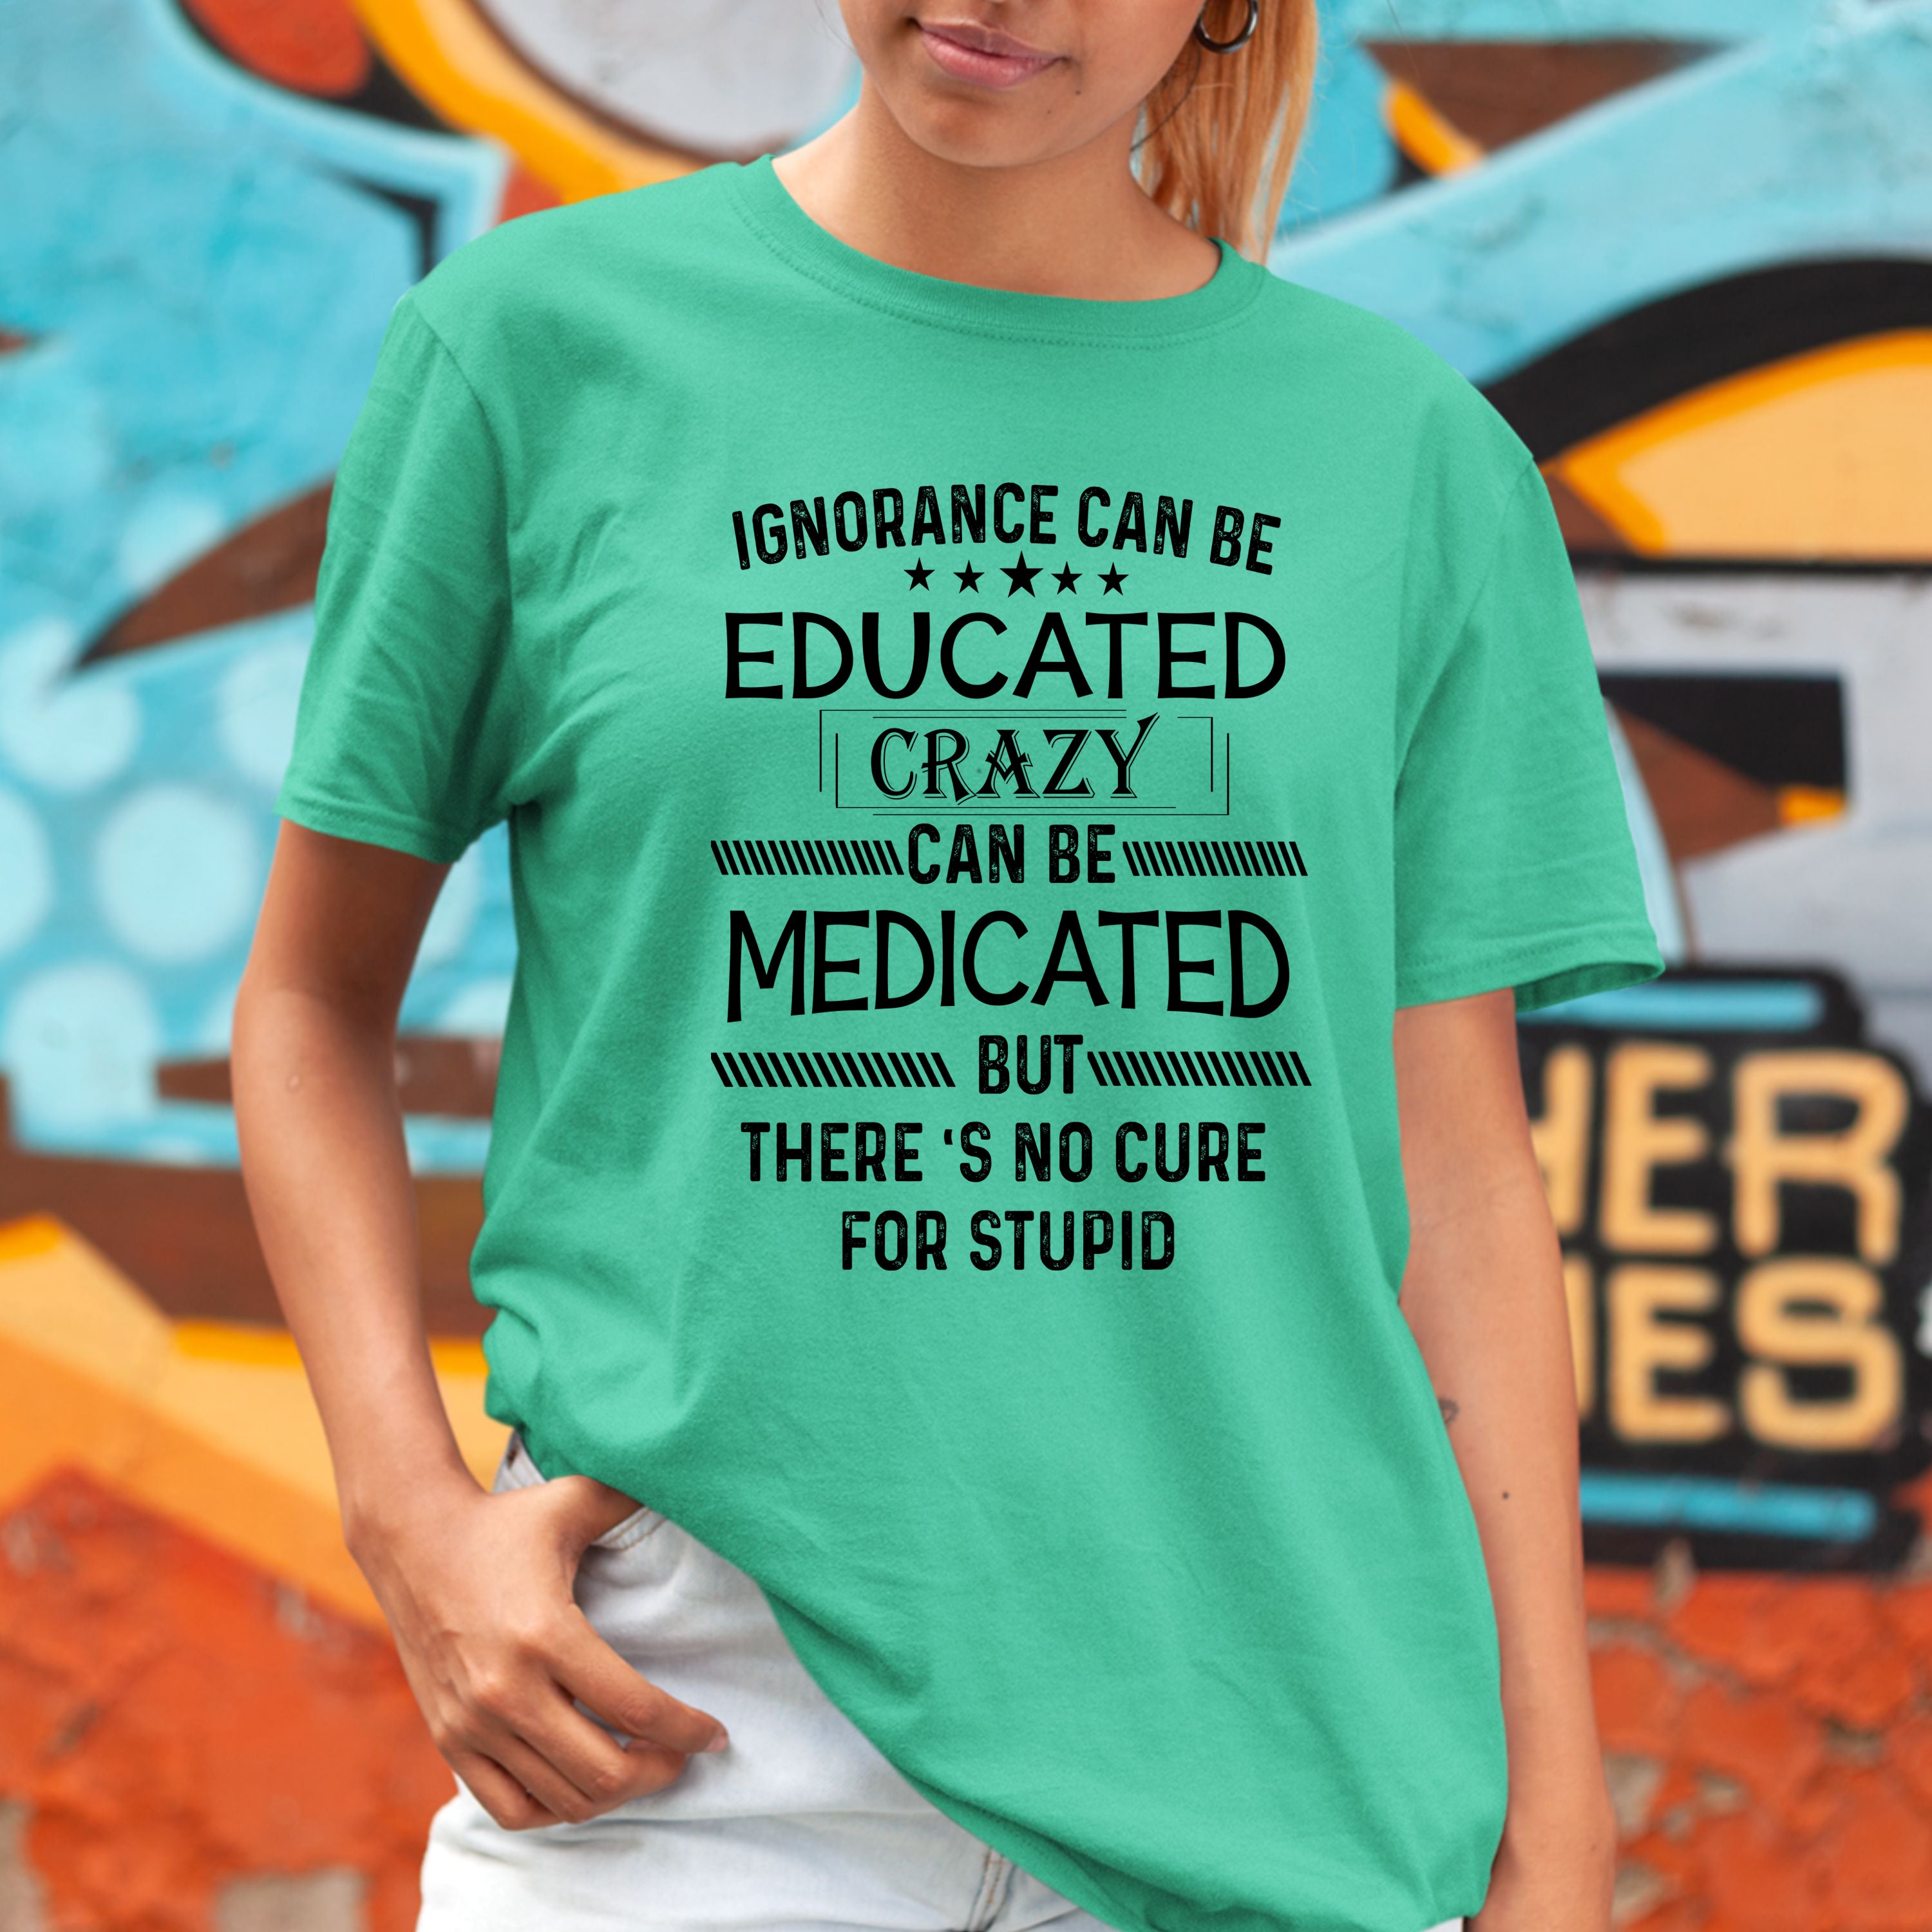 Ignorance Can Be Educated Crazy - Bella canvas